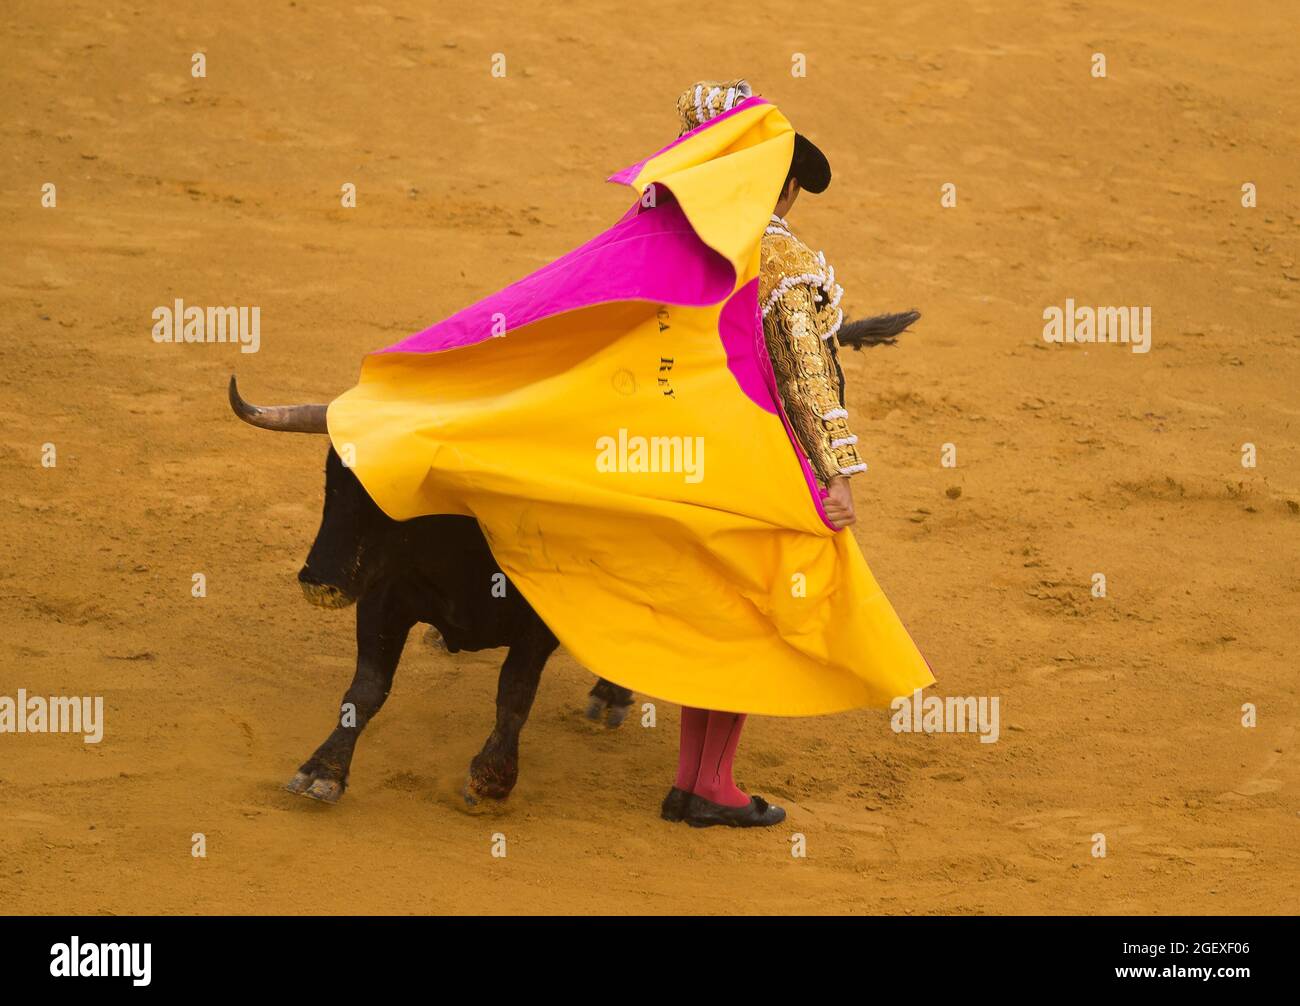 Peruvian bullfighter Andres Roca Rey performs a pass to a bull during a  bullfight at La Malagueta  is a controversial  tradition in Spain criticized by organizations in favor of animal rights